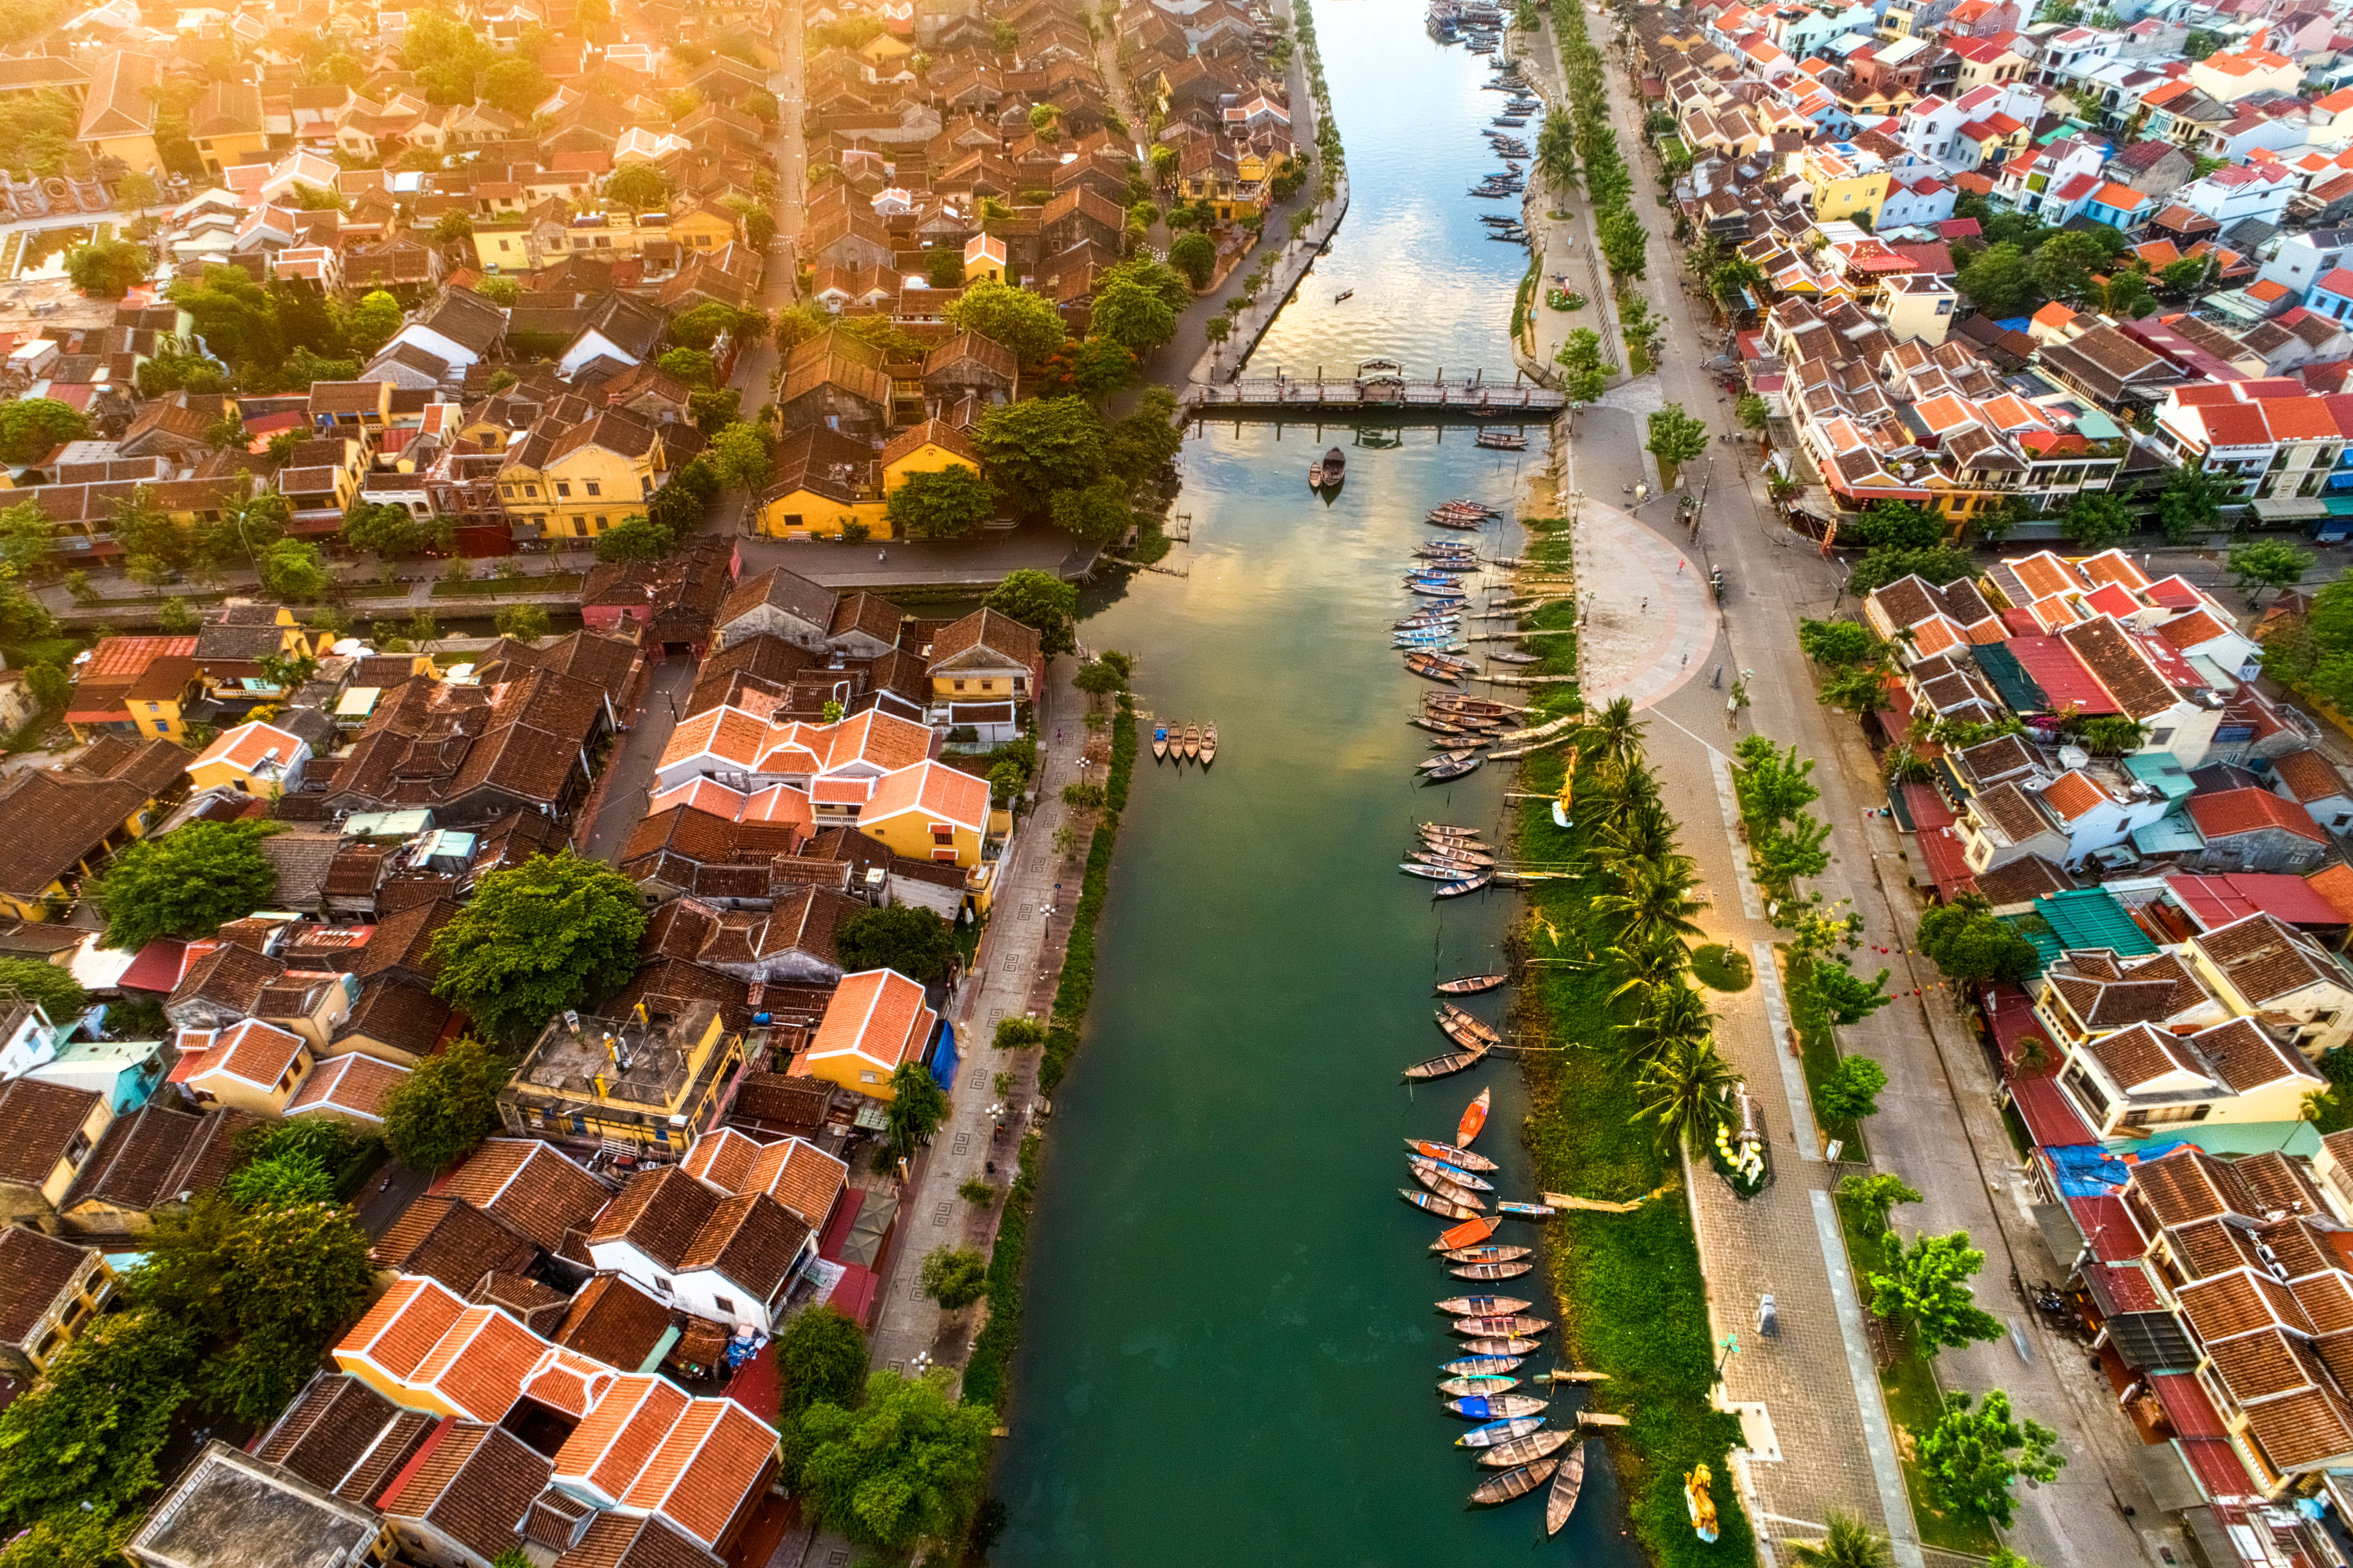 Aerial view of Hoi An town